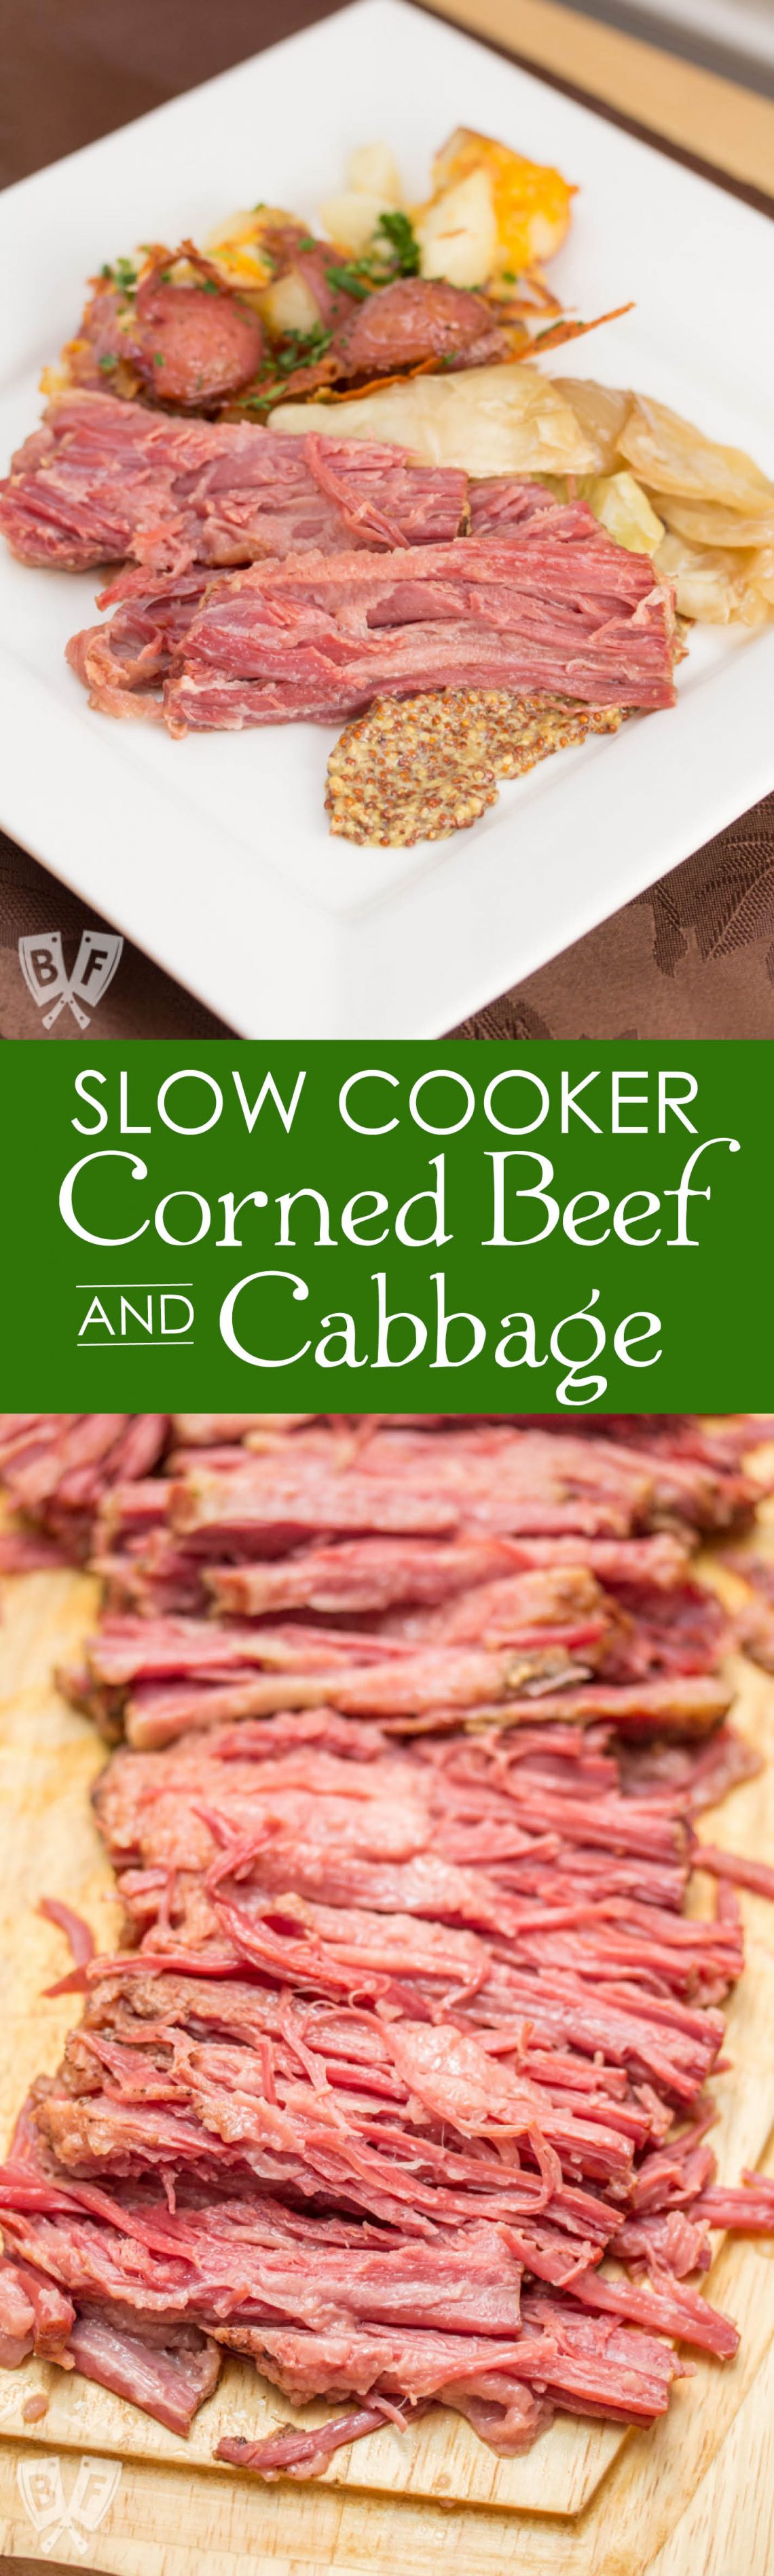 Slow-Cooker Guinness Corned Beef and Cabbage » Big Flavors from a Tiny ...